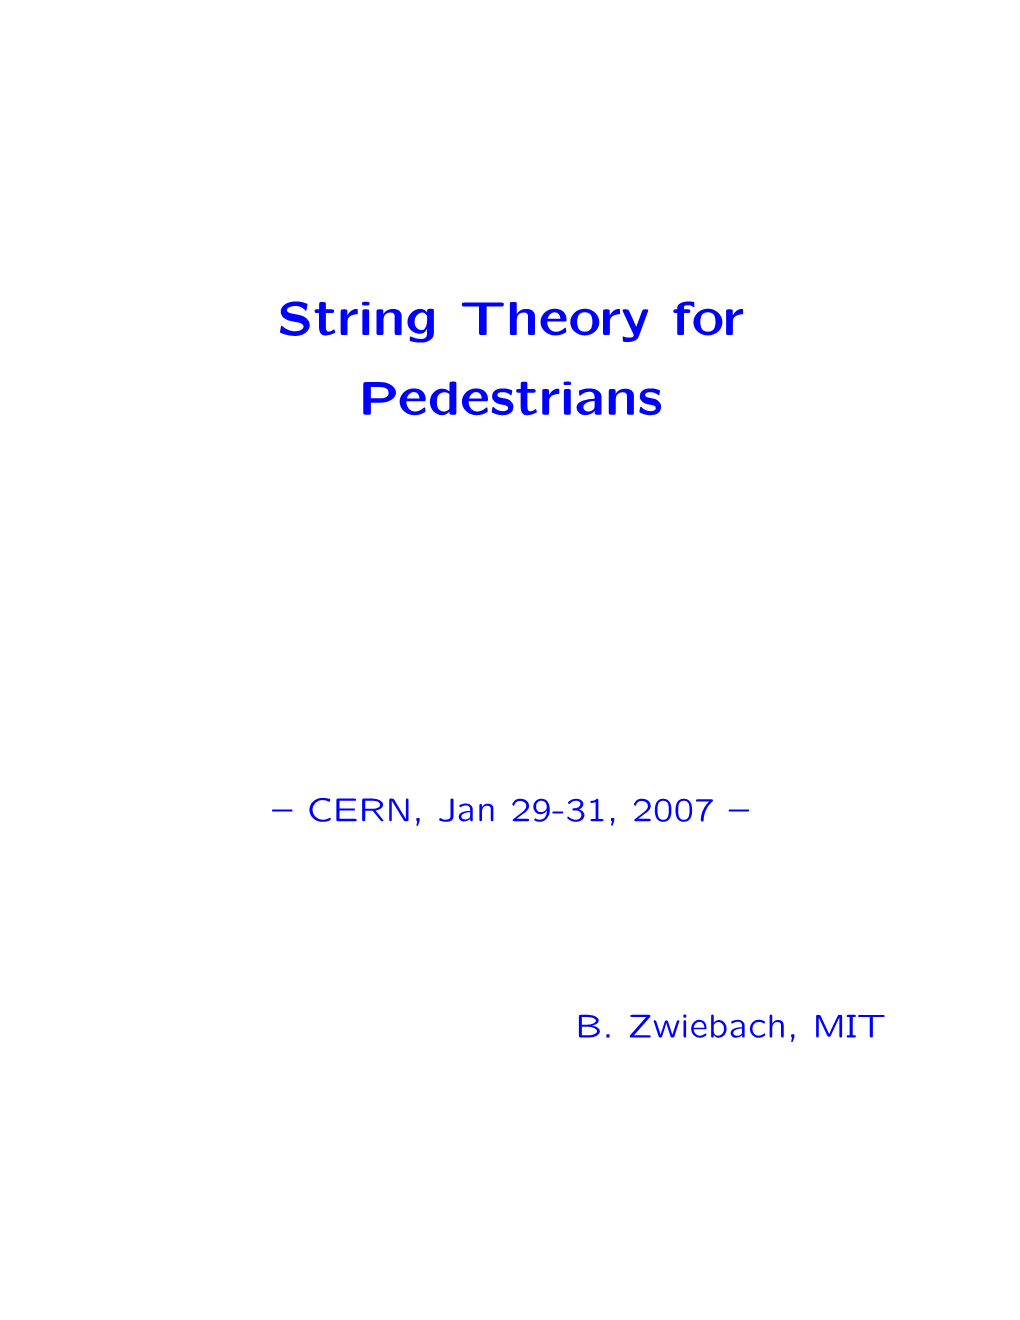 String Theory for Pedestrians